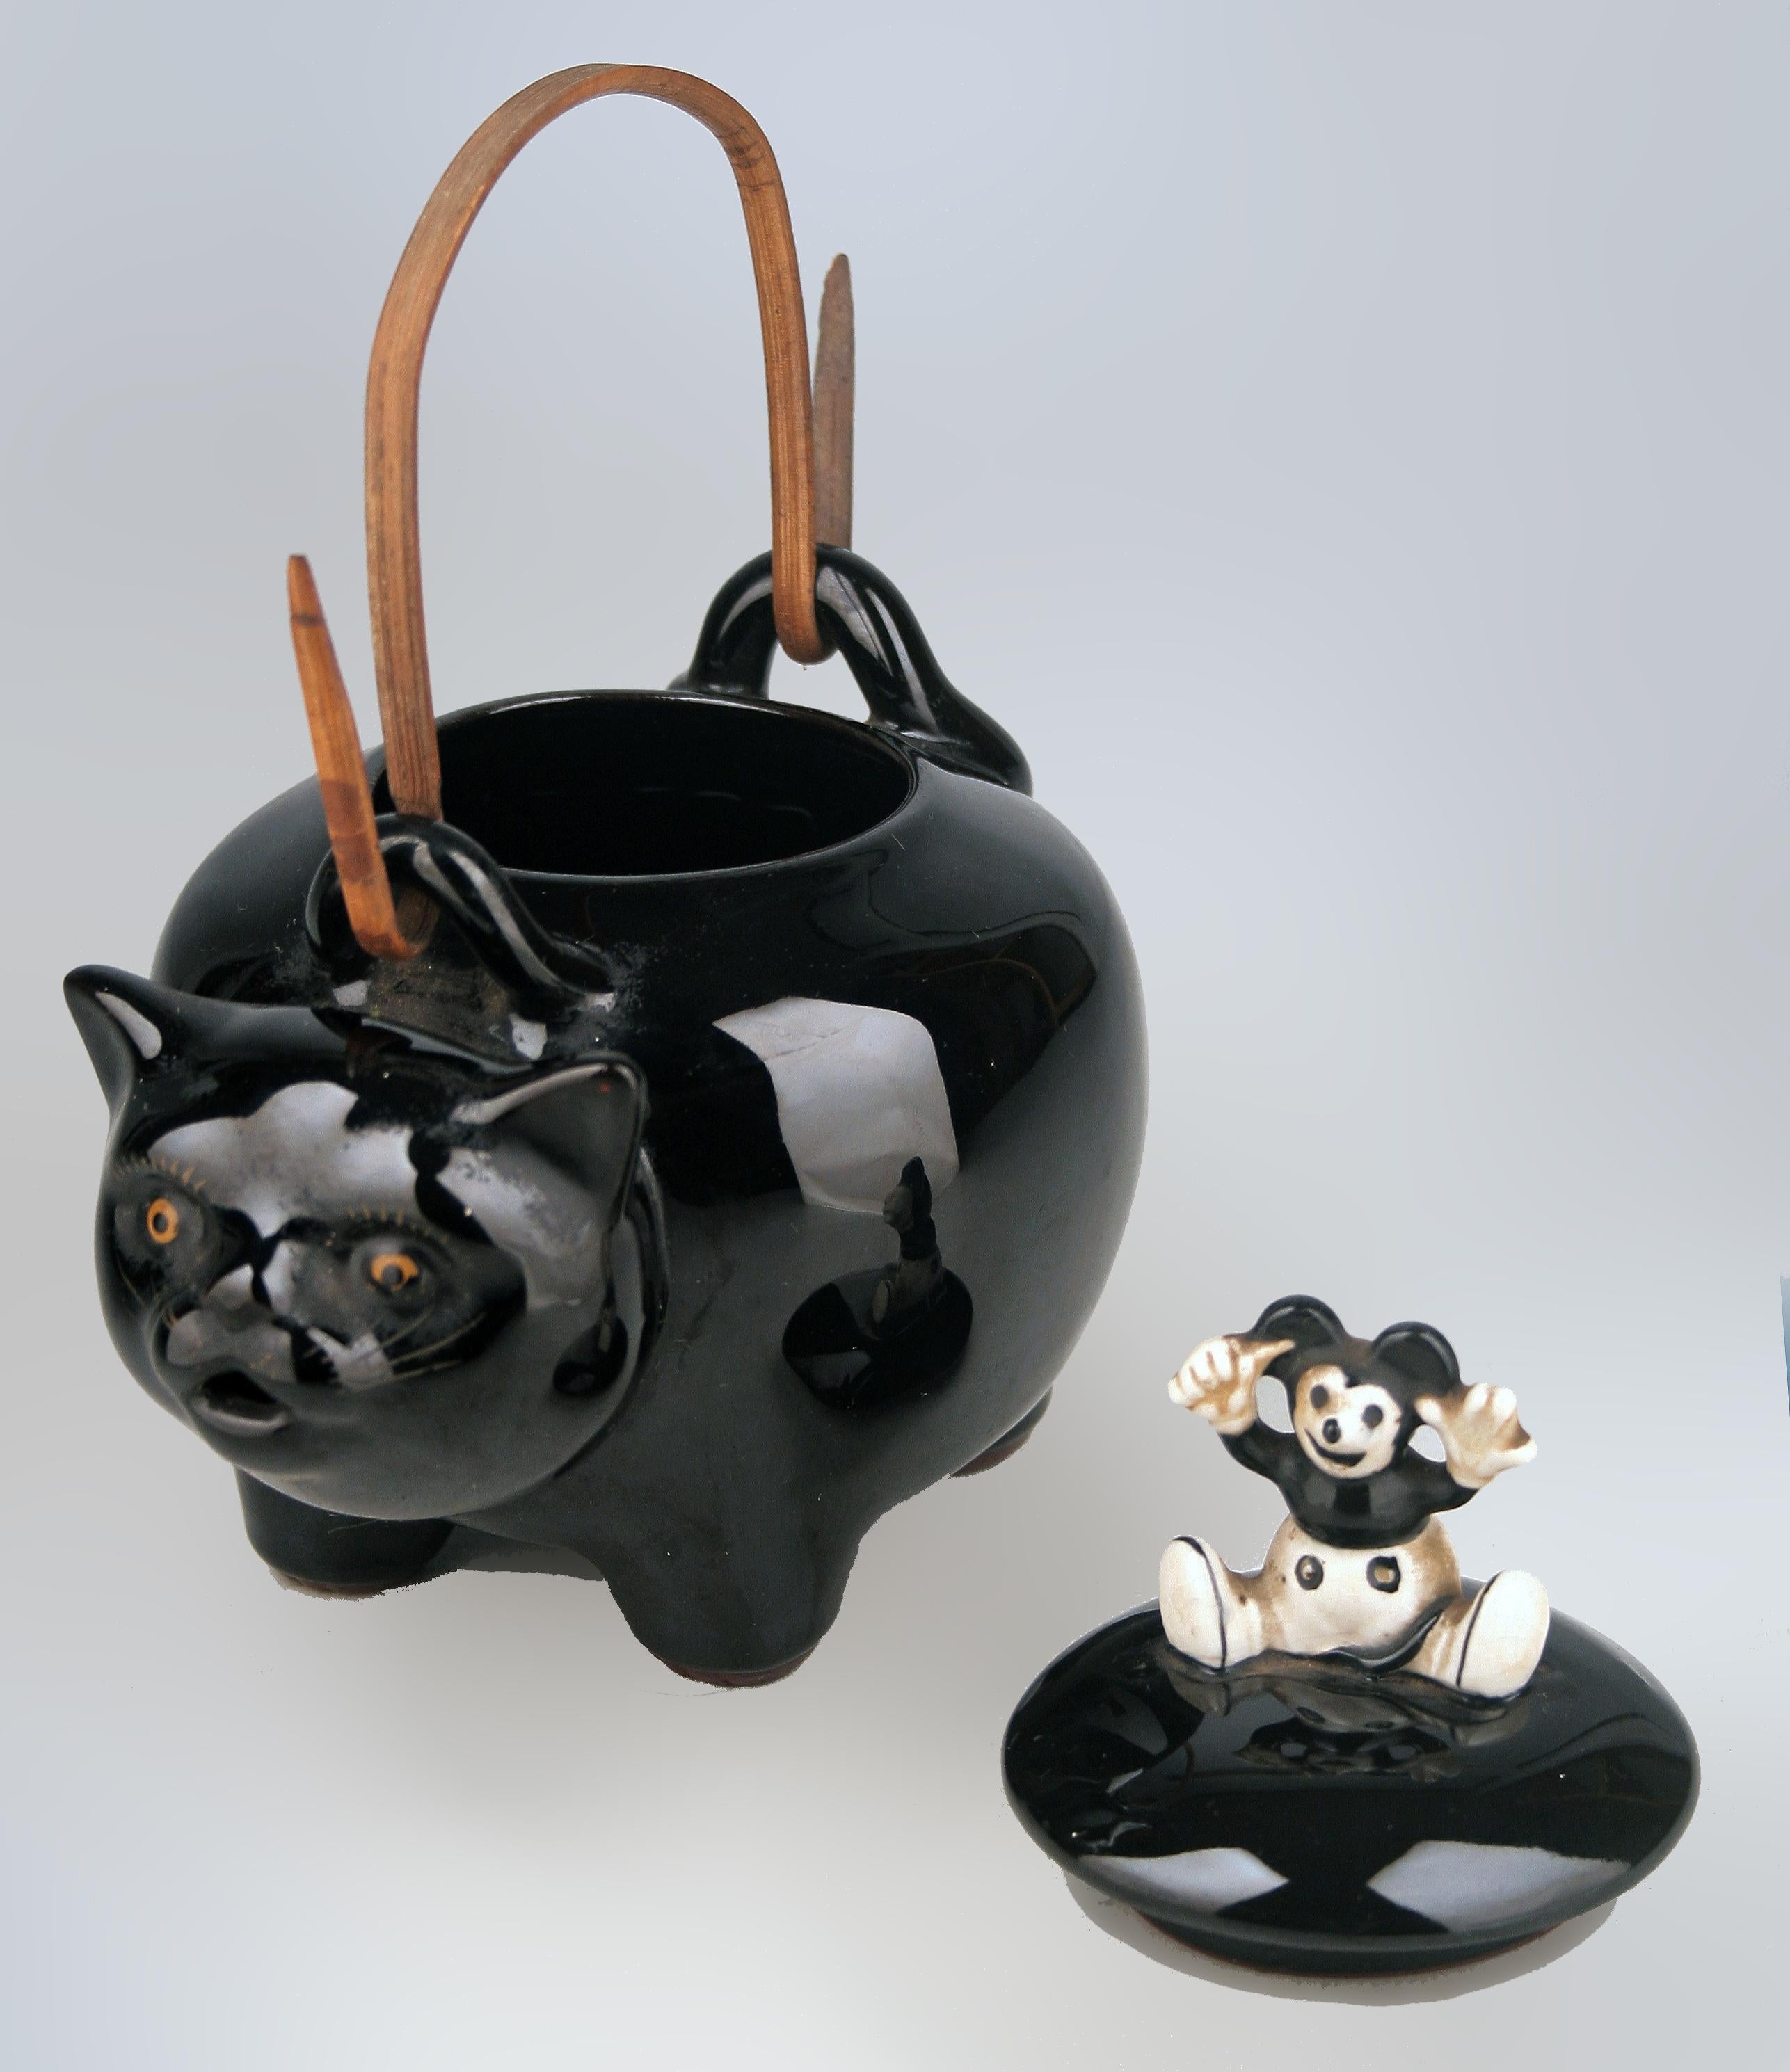 Hand-Carved 20th C./Shōwa Era Japanese Glazed Porcelain Teapot of Black Cat with Mouse Lid For Sale